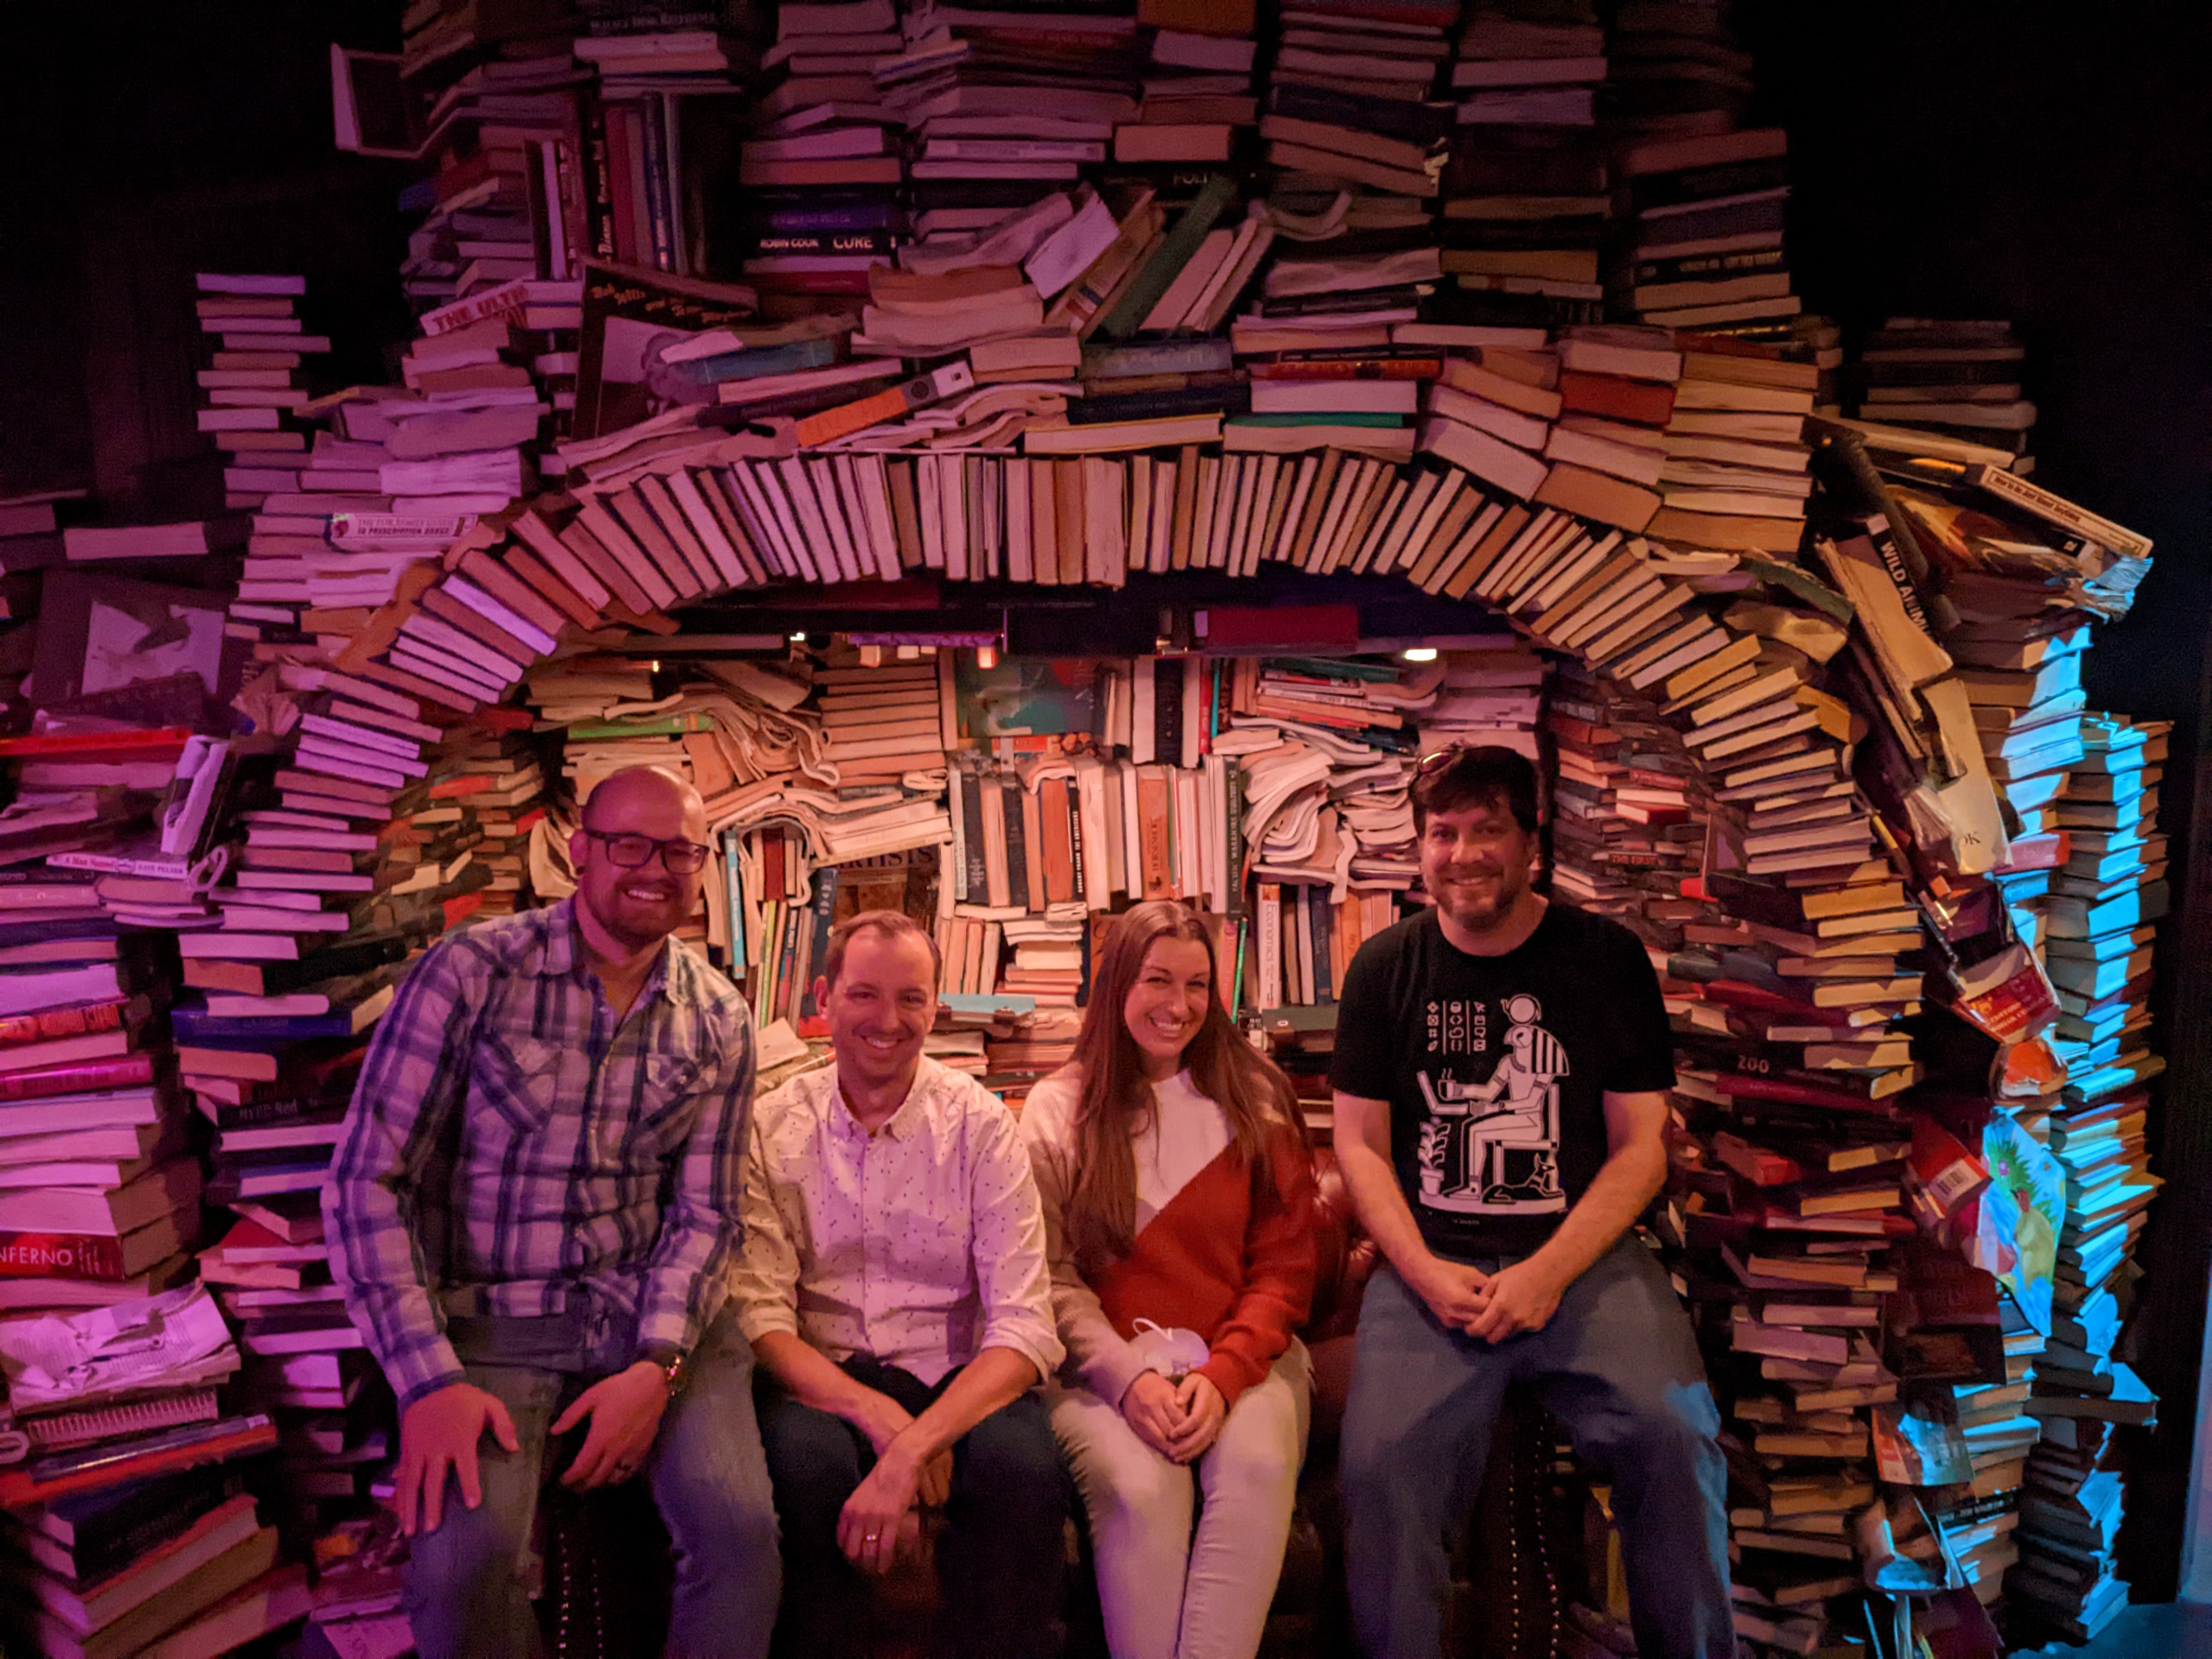 Four Aten staff in front of a book art sculpture at Meow Wolf